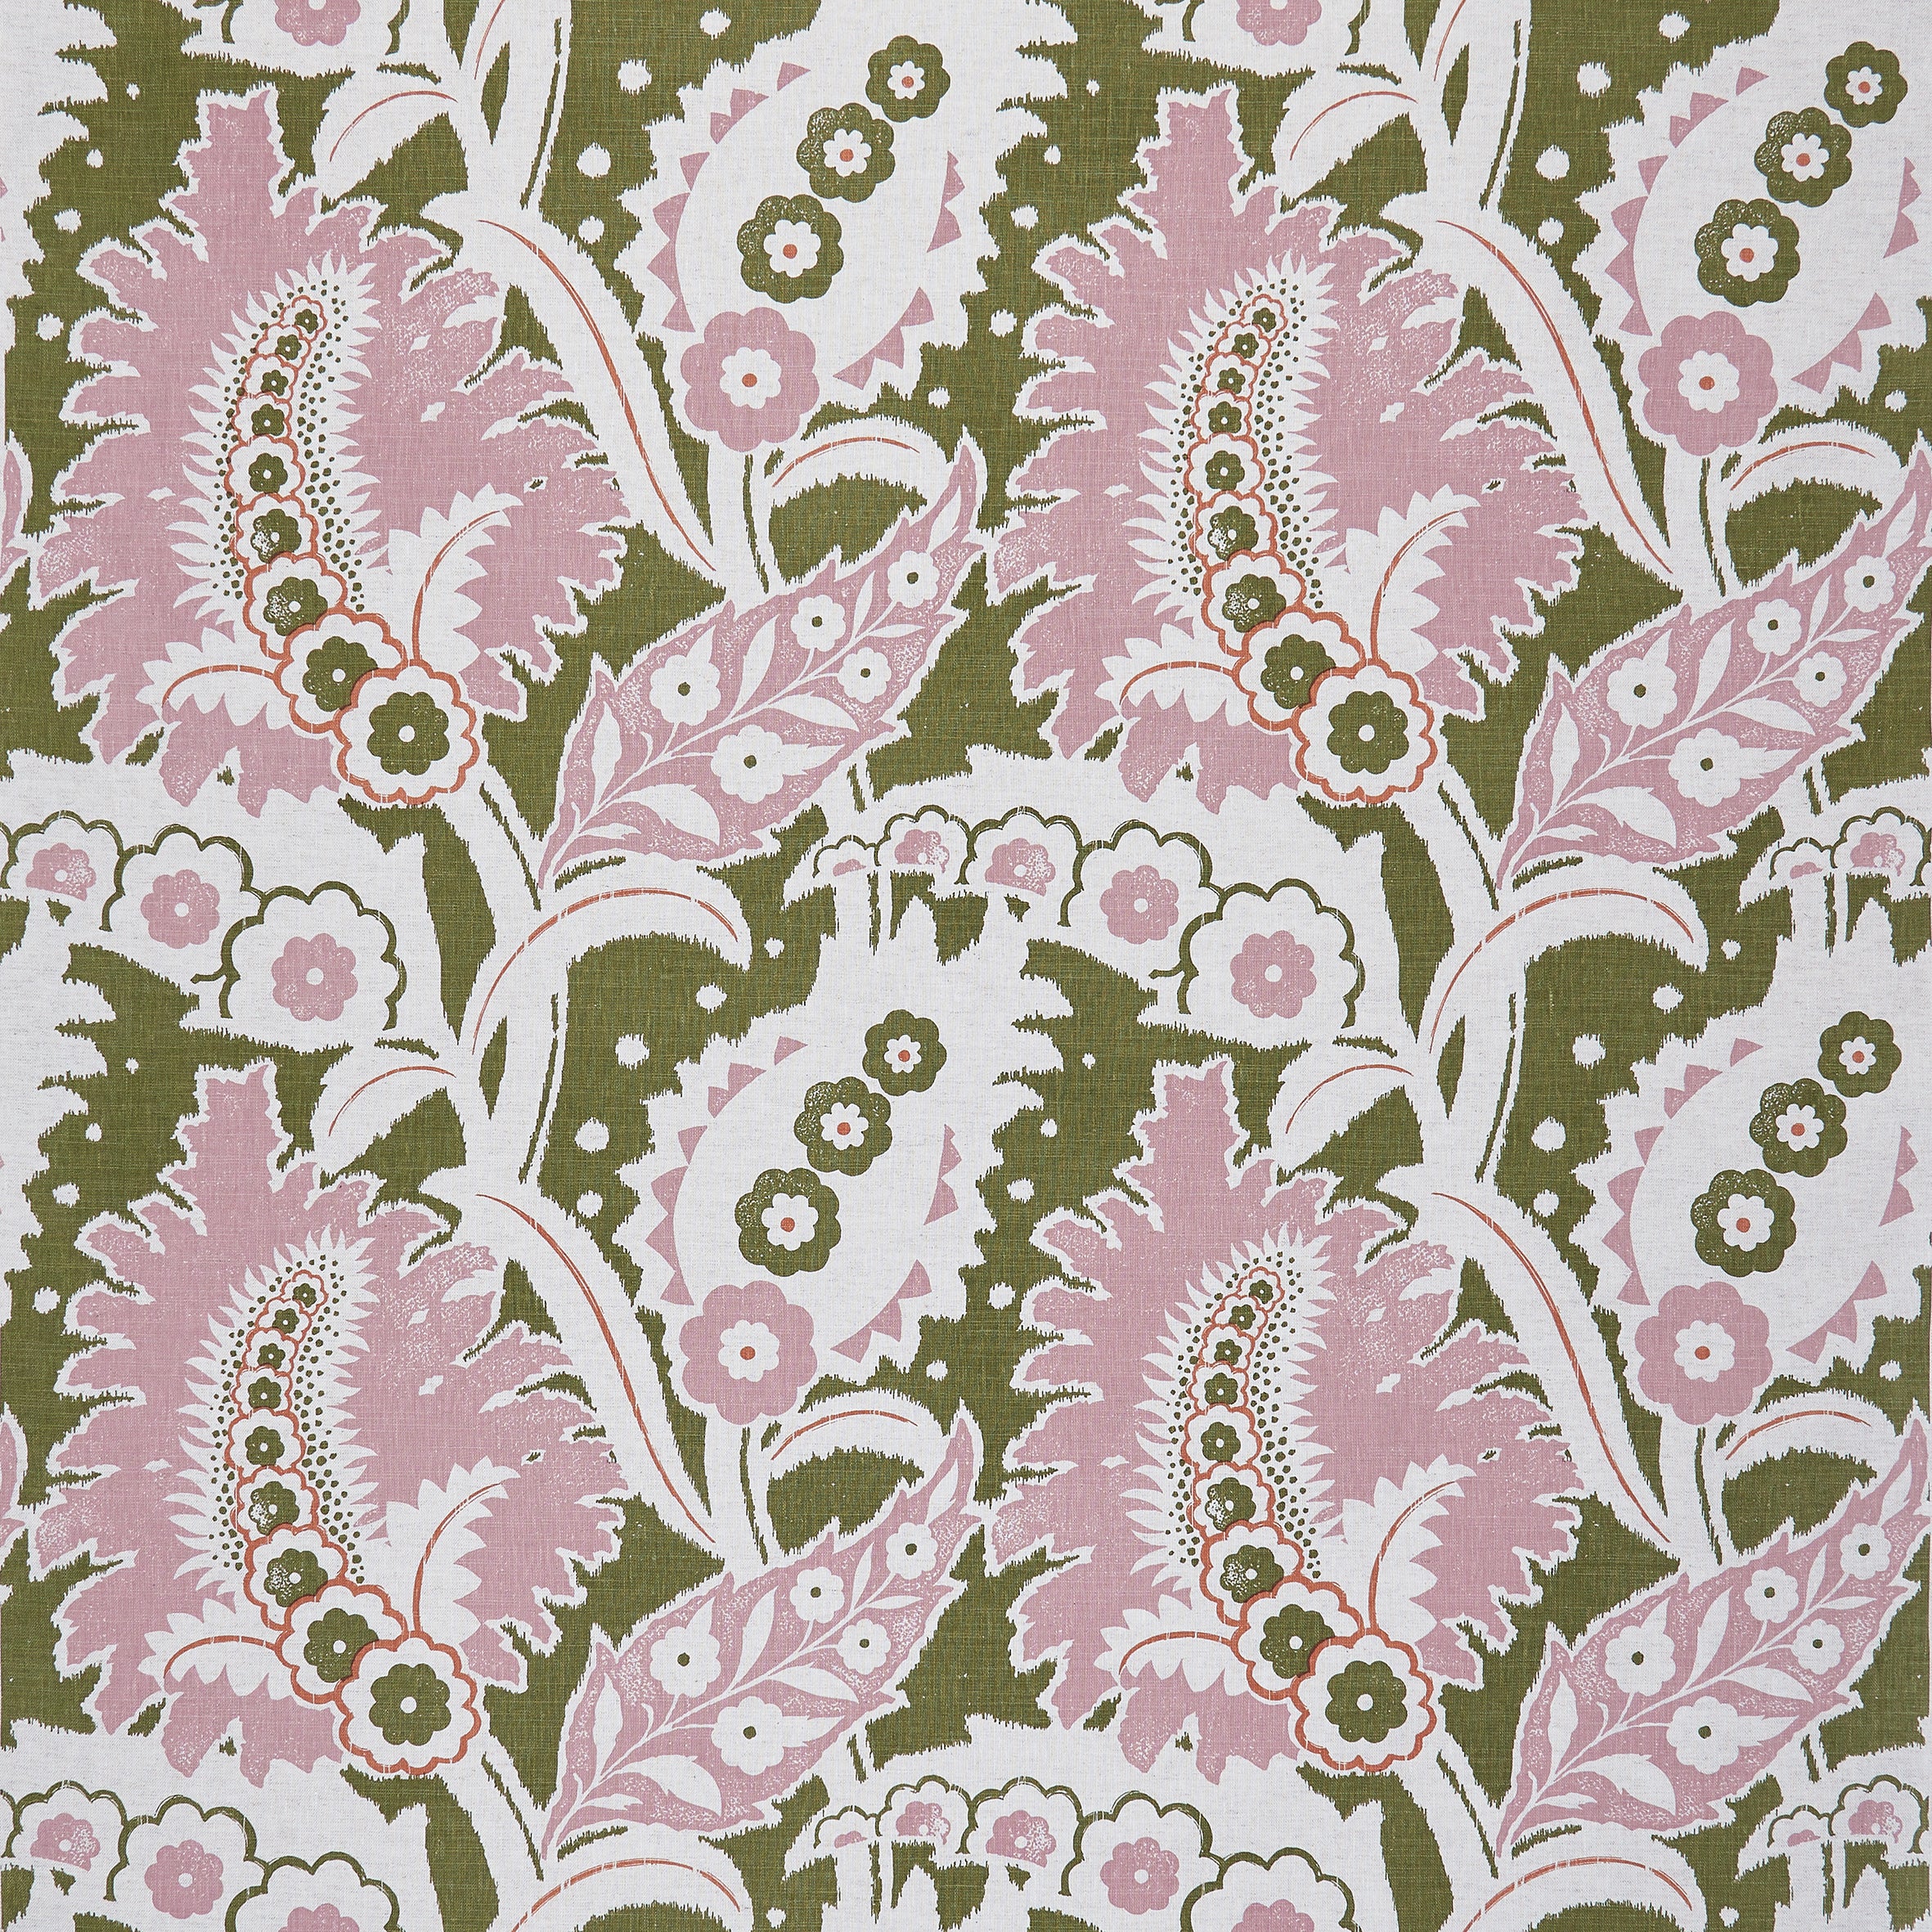 Detail of fabric in a botanical paisley print in shades of white, purple and bronze on a green field.